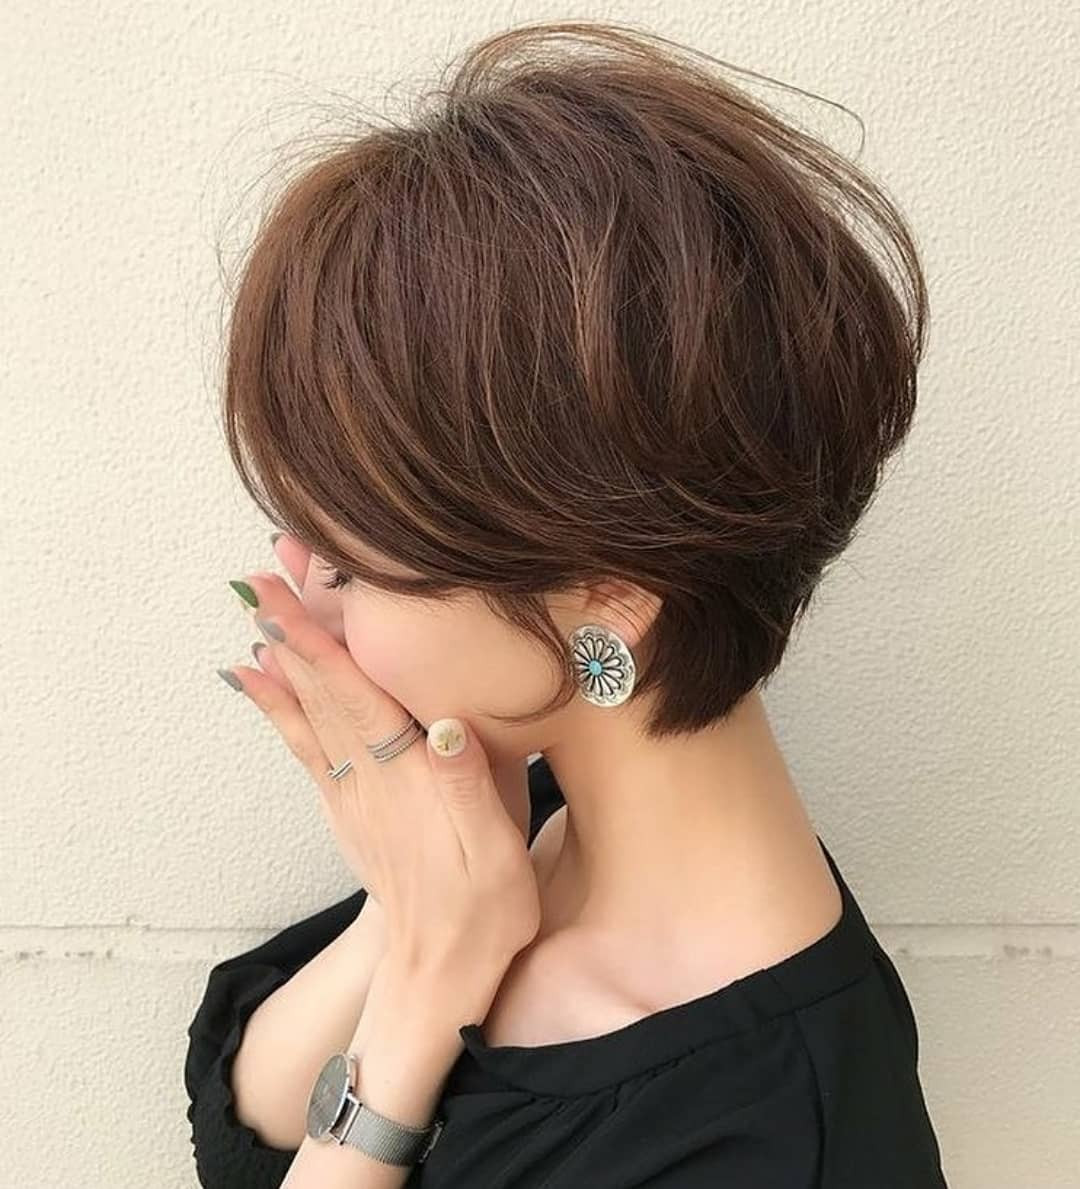 Cute Short Haircuts For Girls
 10 Cute Short Hairstyles and Haircuts for Young Girls